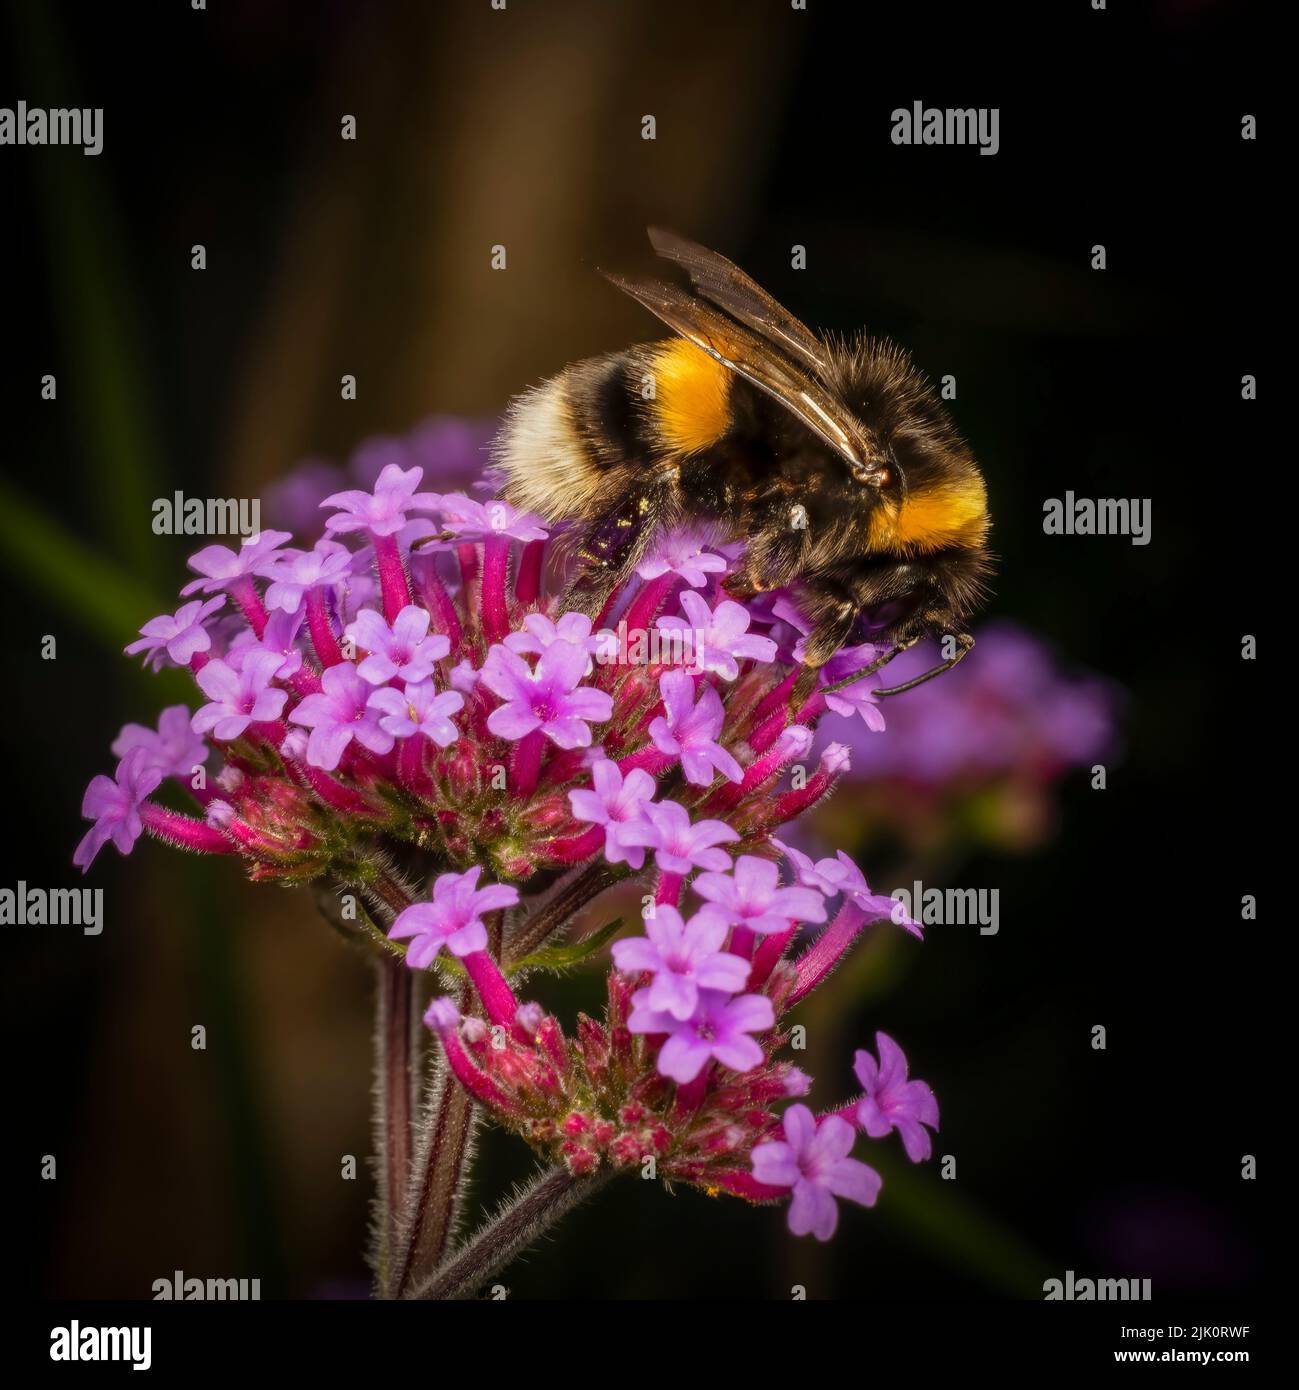 A close upon a WhiteTailed Bumble Bee extracting nectar from a Verbena flower Stock Photo